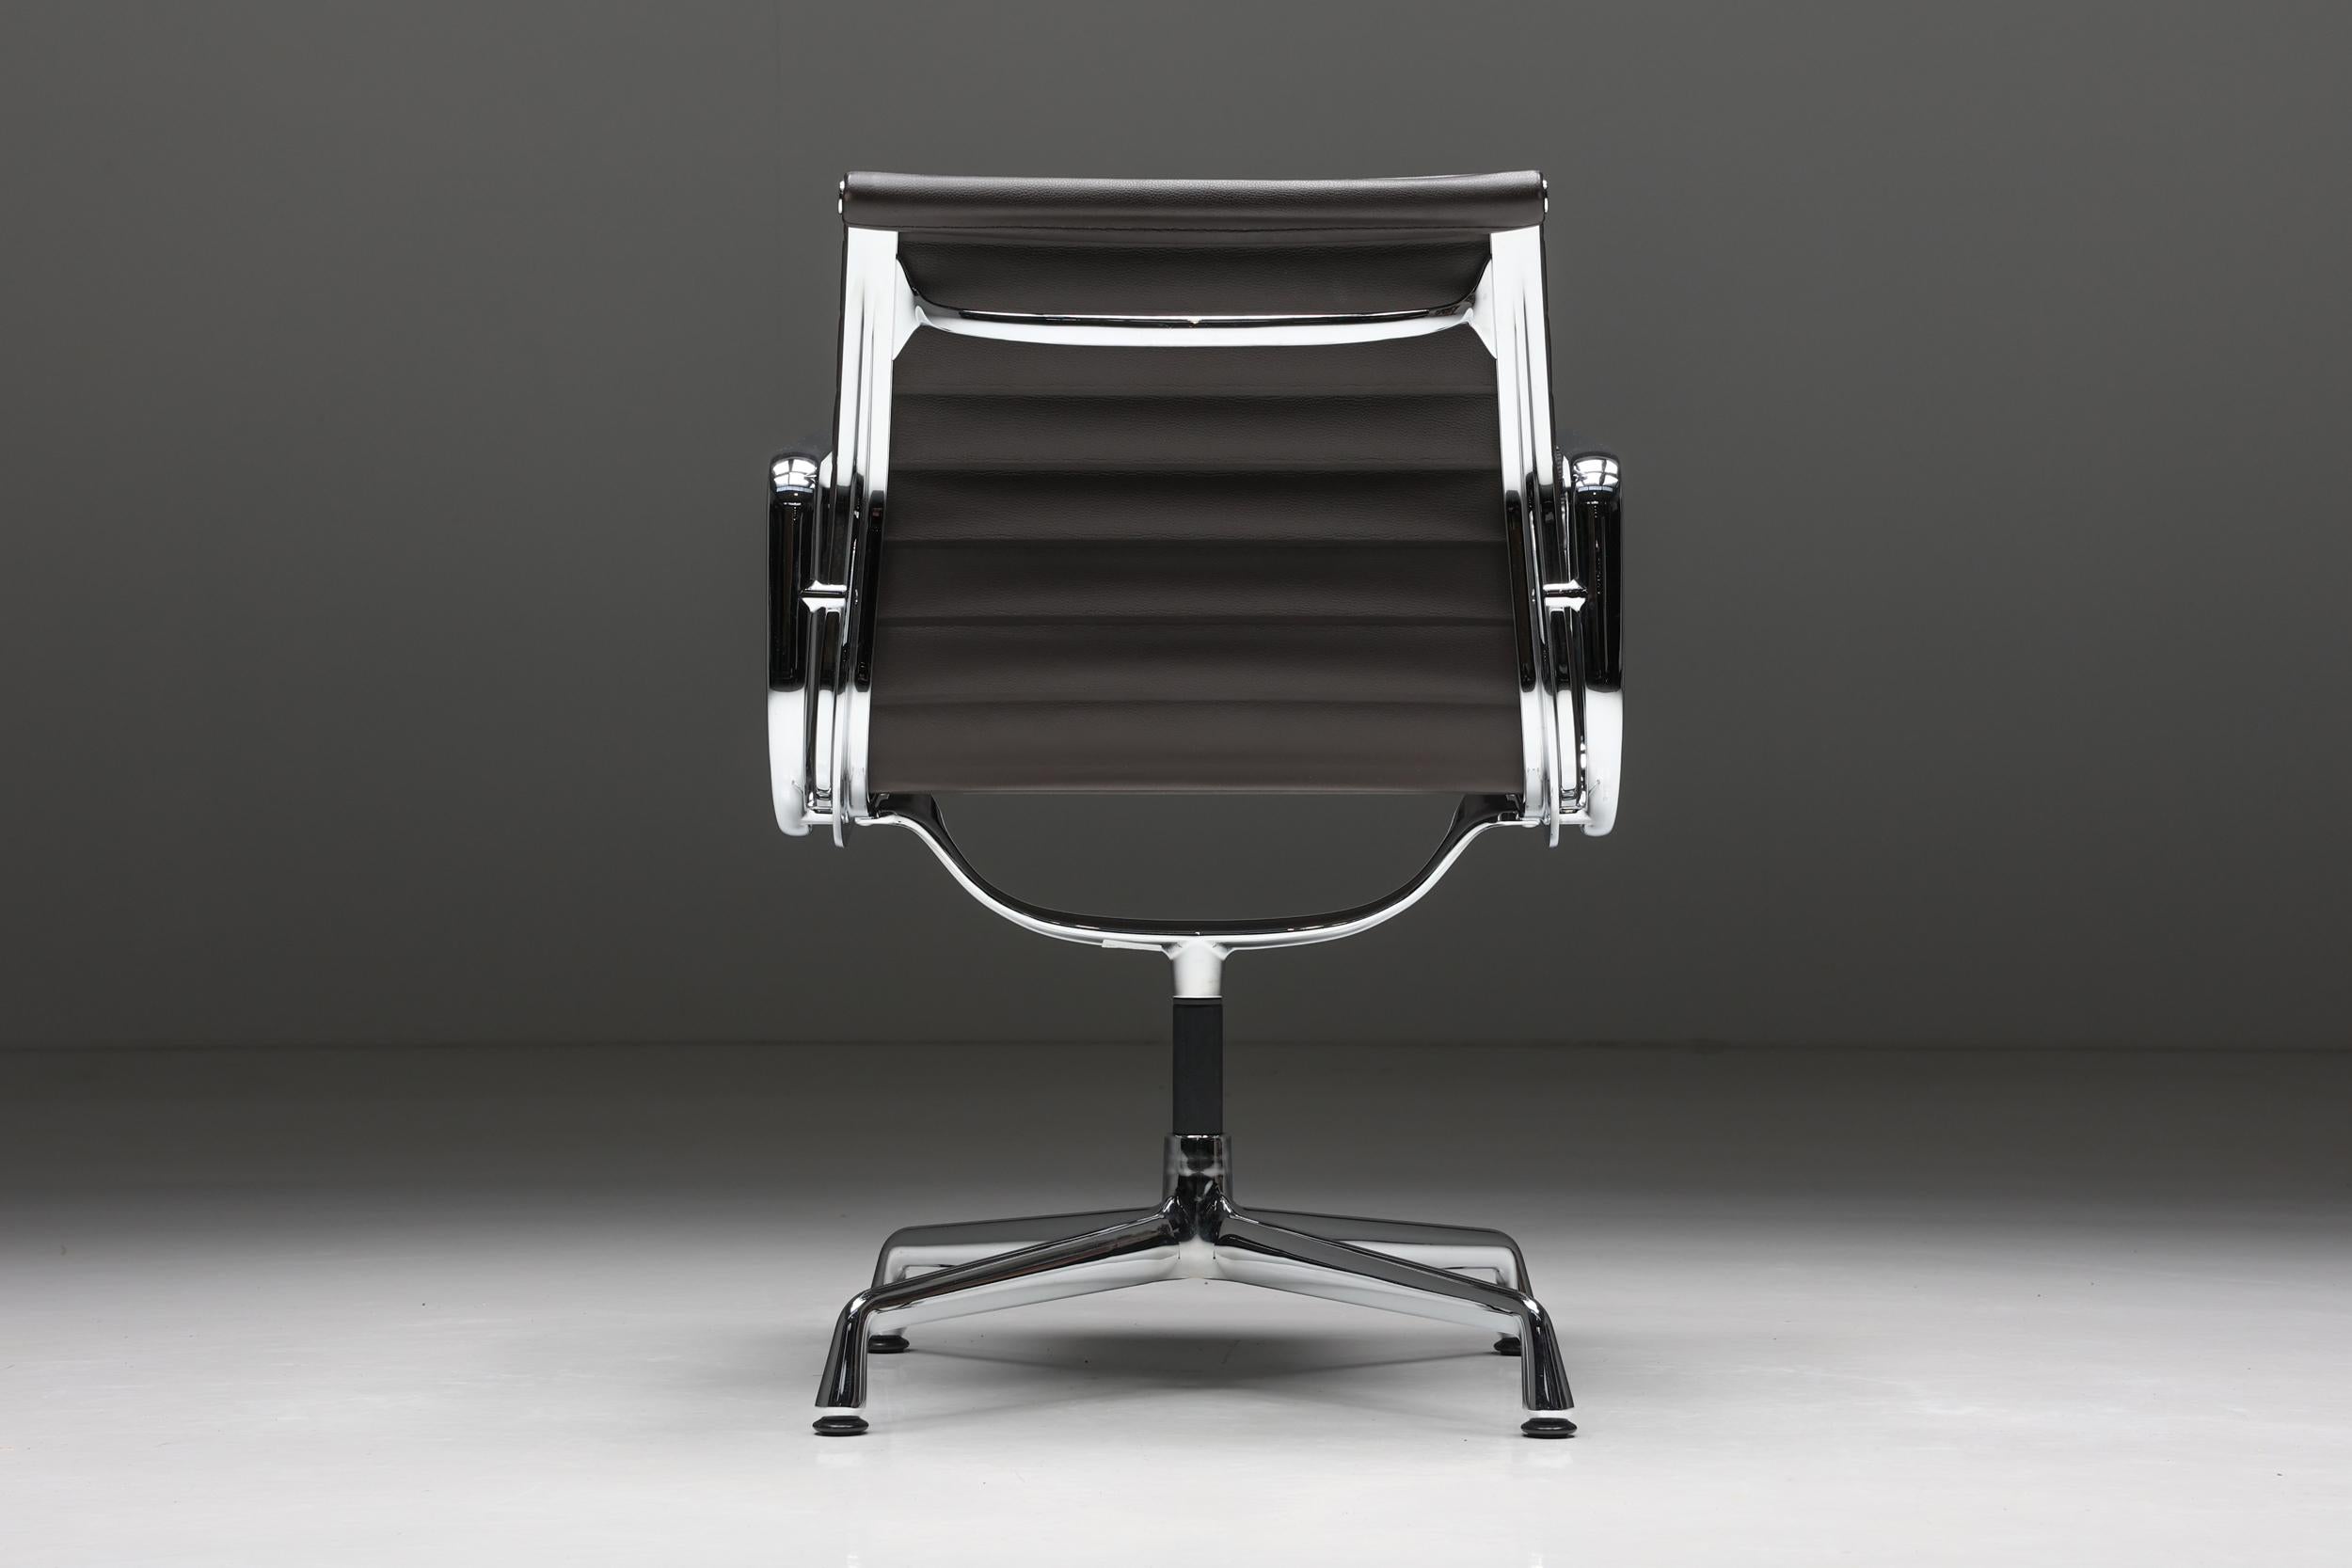 Aluminum Chair; Charles & Ray Eames; Vitra; 1958; Office Chair; Leather; Chrome; Brown; The Aluminum Group; USA; Eames; 

Aluminum chair designed by Charles & Ray Eames and manufactured by Vitra in 1958. Vitra Eames chair featuring soft brown